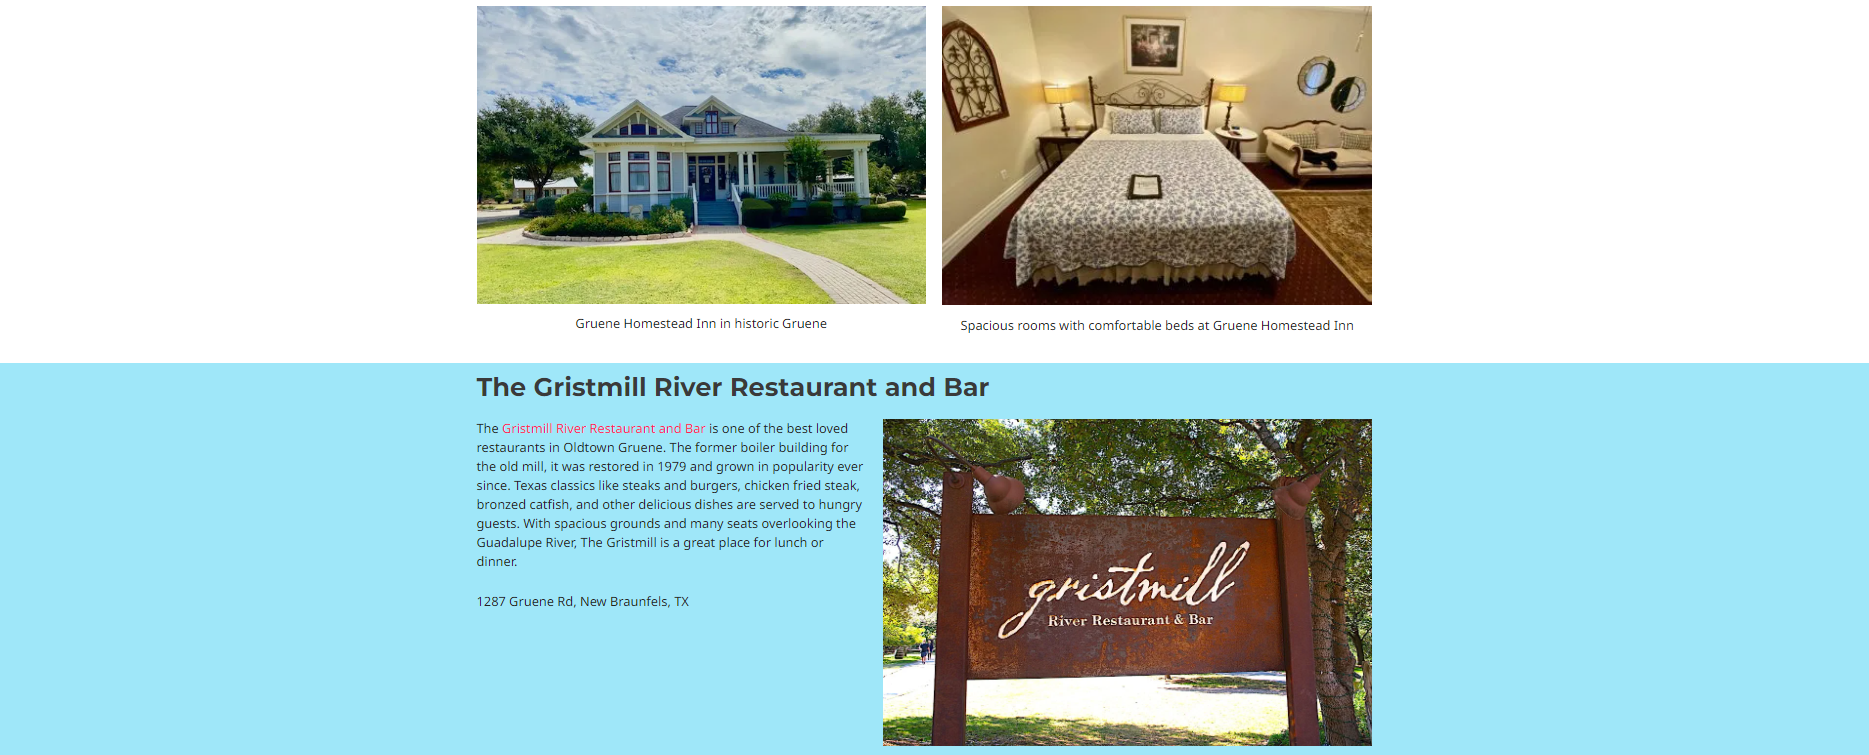 The Gristmill River Restaurant and Bar